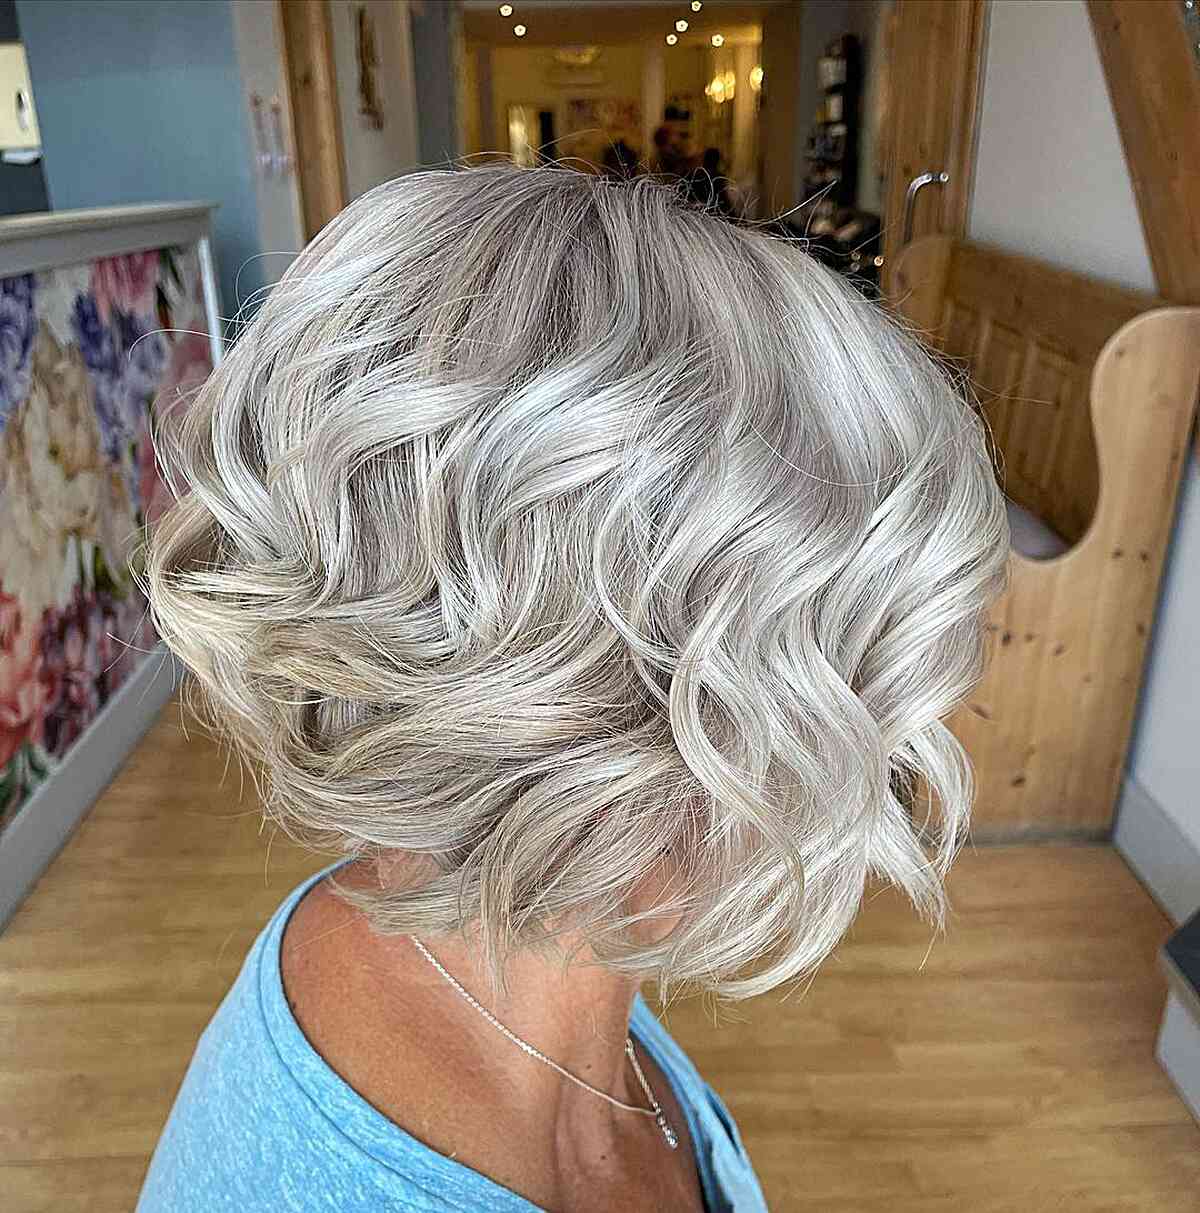 Chin-Length Short Wavy Hair with Silver Tones on Women Over 60